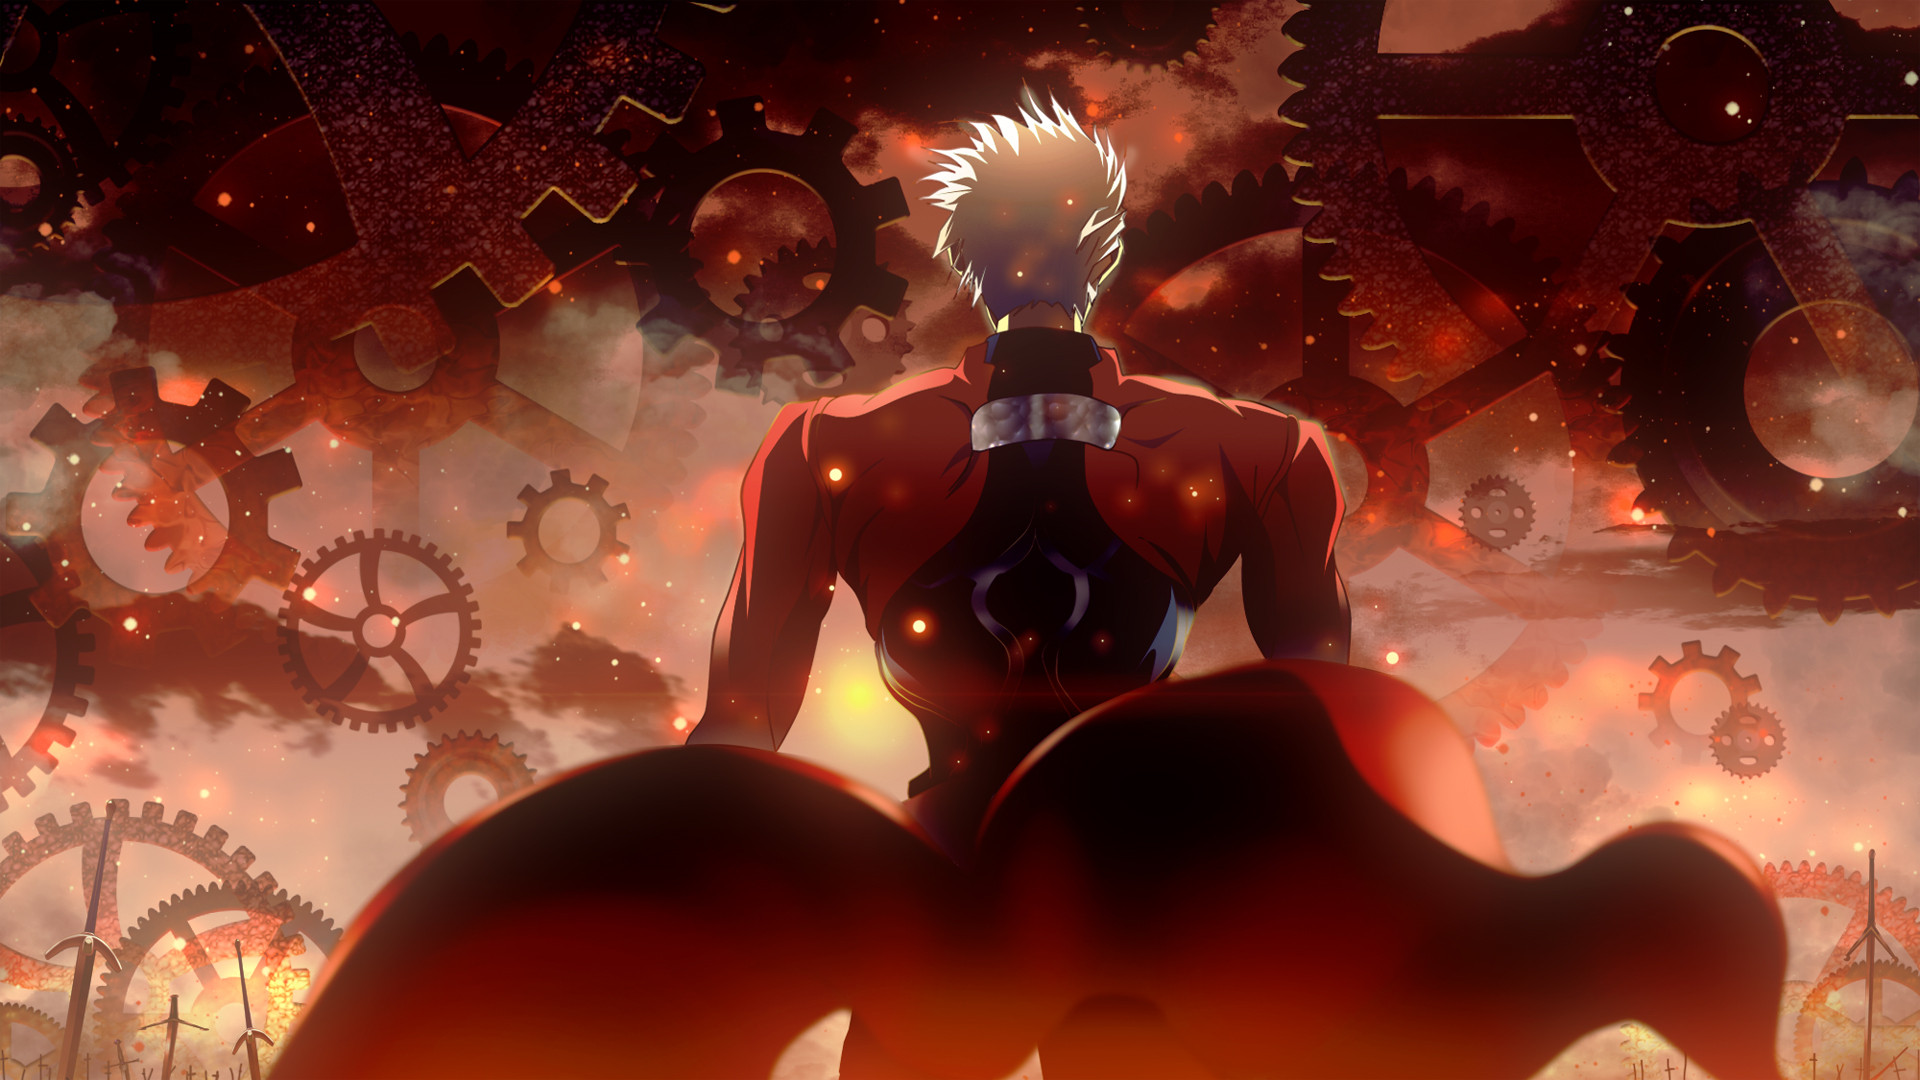 1920x1080 > Fate Stay Night: Unlimited Blade Works Wallpapers